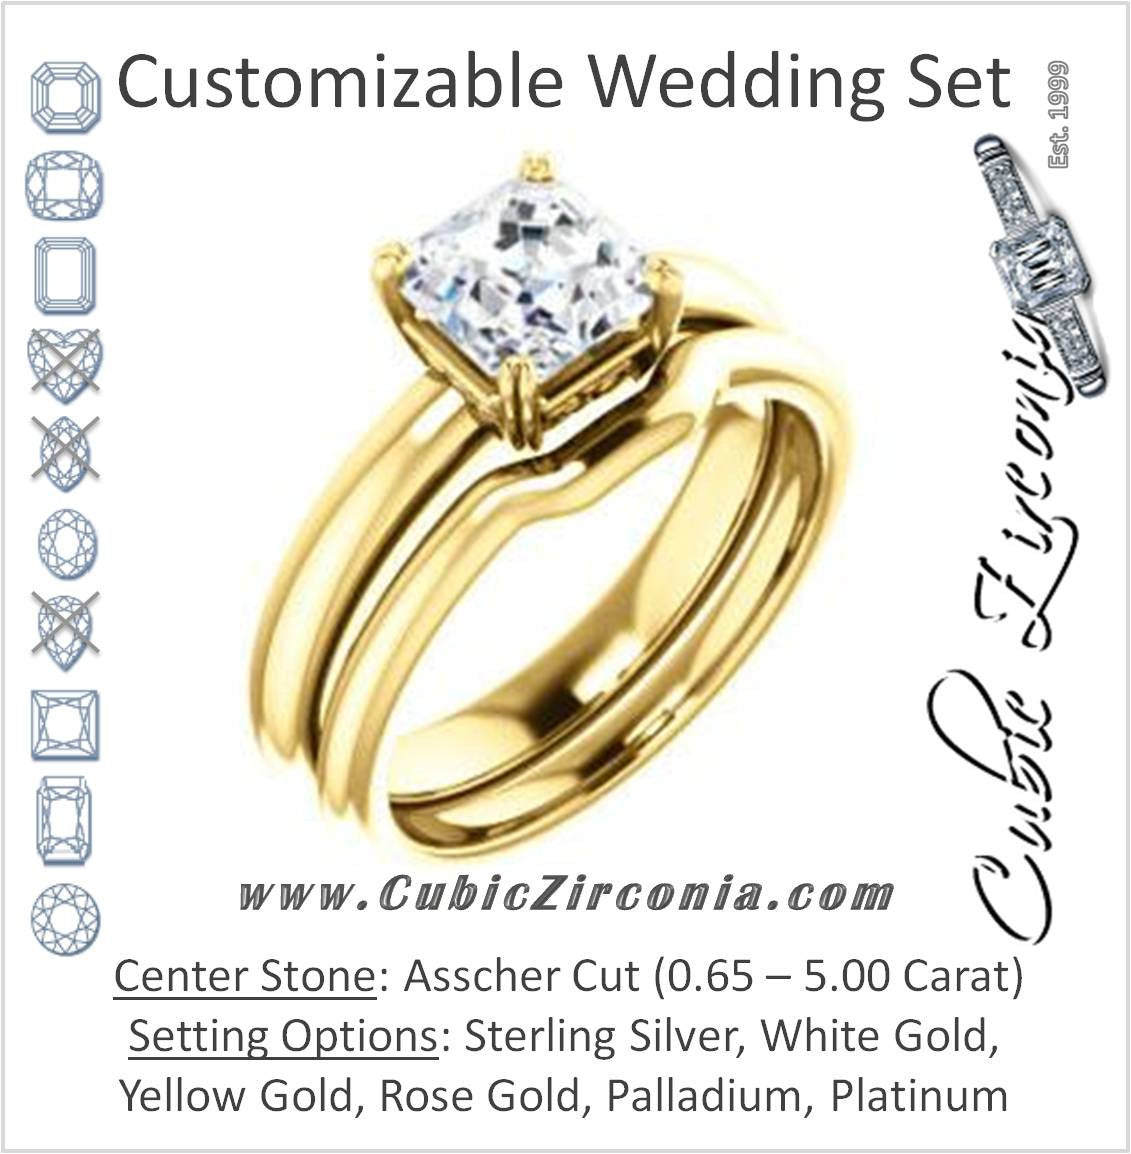 CZ Wedding Set, featuring The Marie Rosalind engagement ring (Customizable Asscher Cut Solitaire with Tooled Trellis Design)